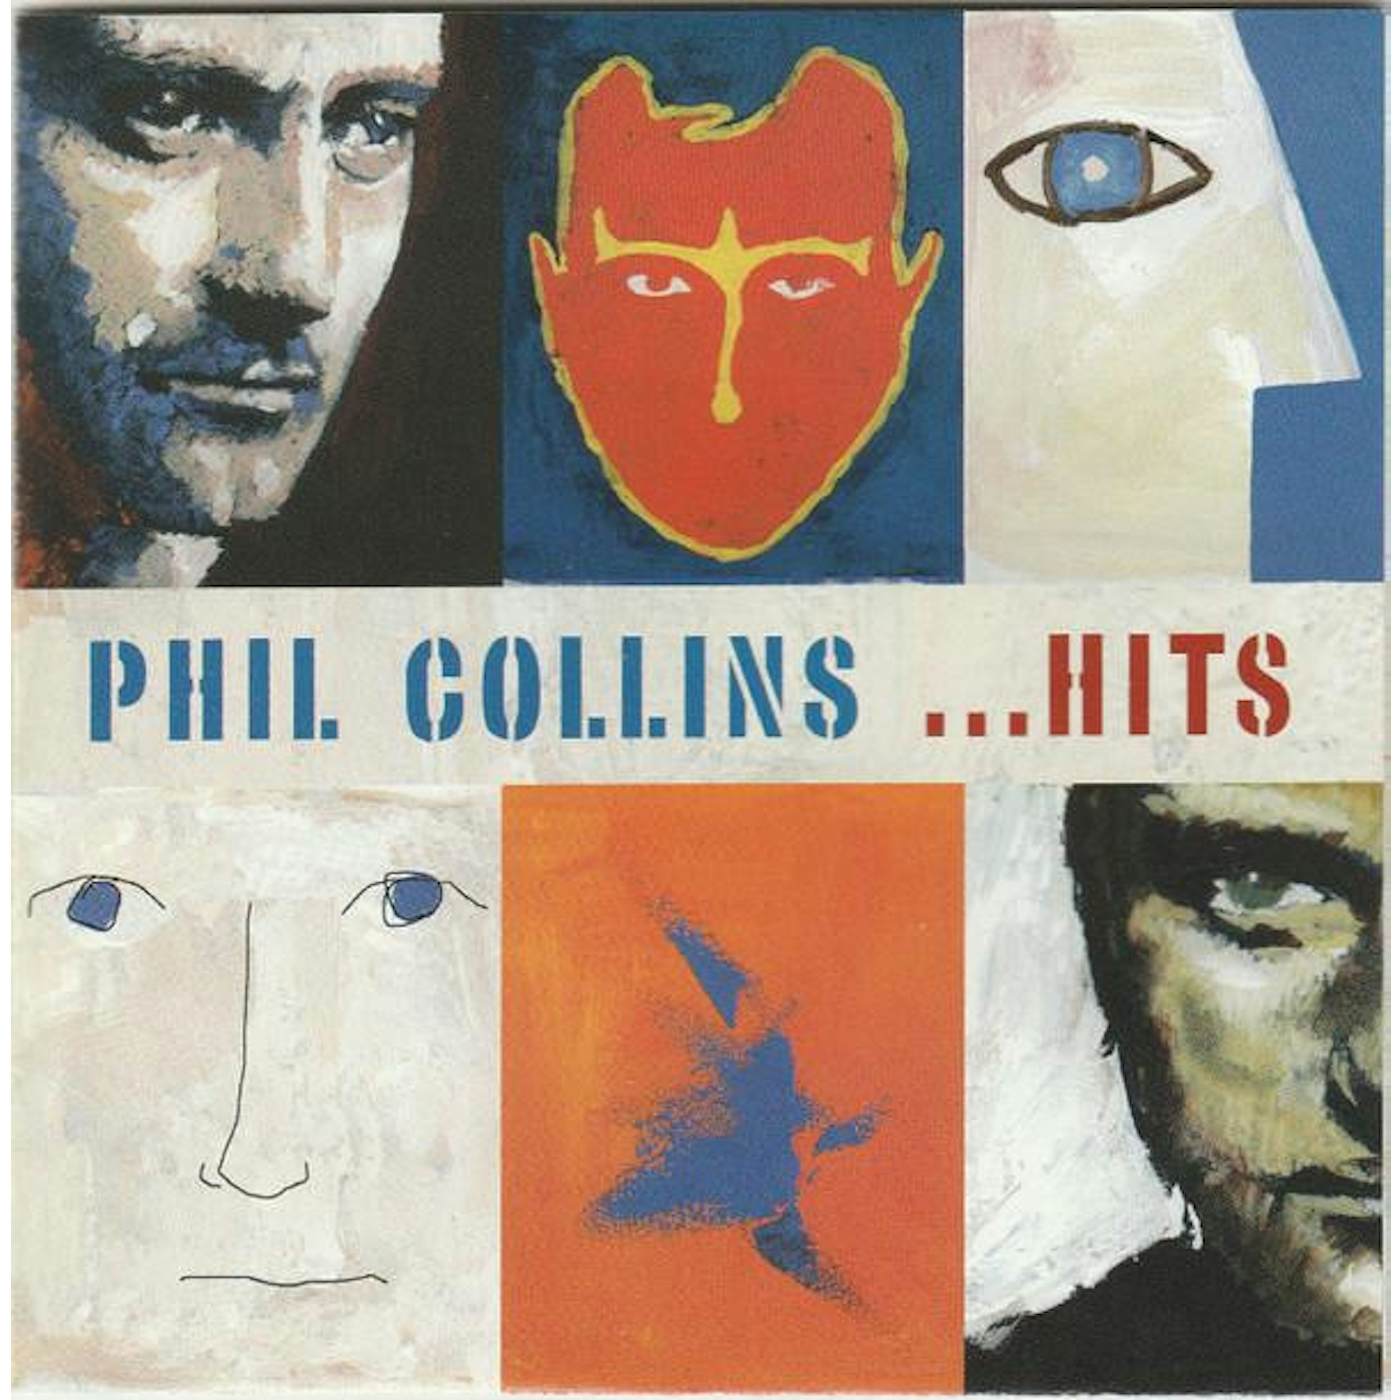 Phil Collins HITS CD